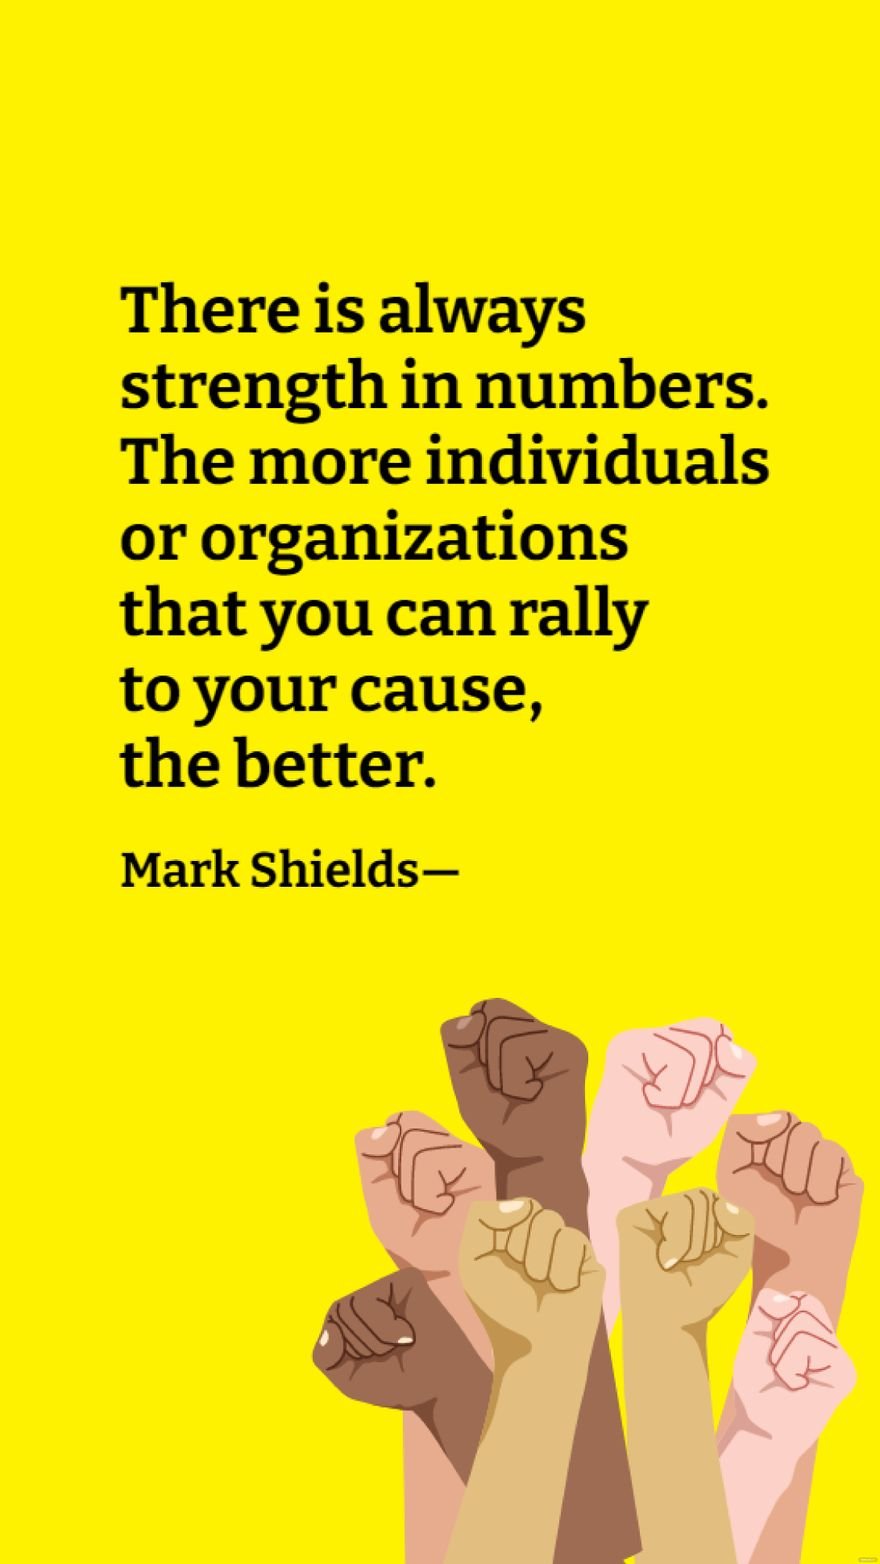 Mark Shields - There is always strength in numbers. The more individuals or organizations that you can rally to your cause, the better in JPG